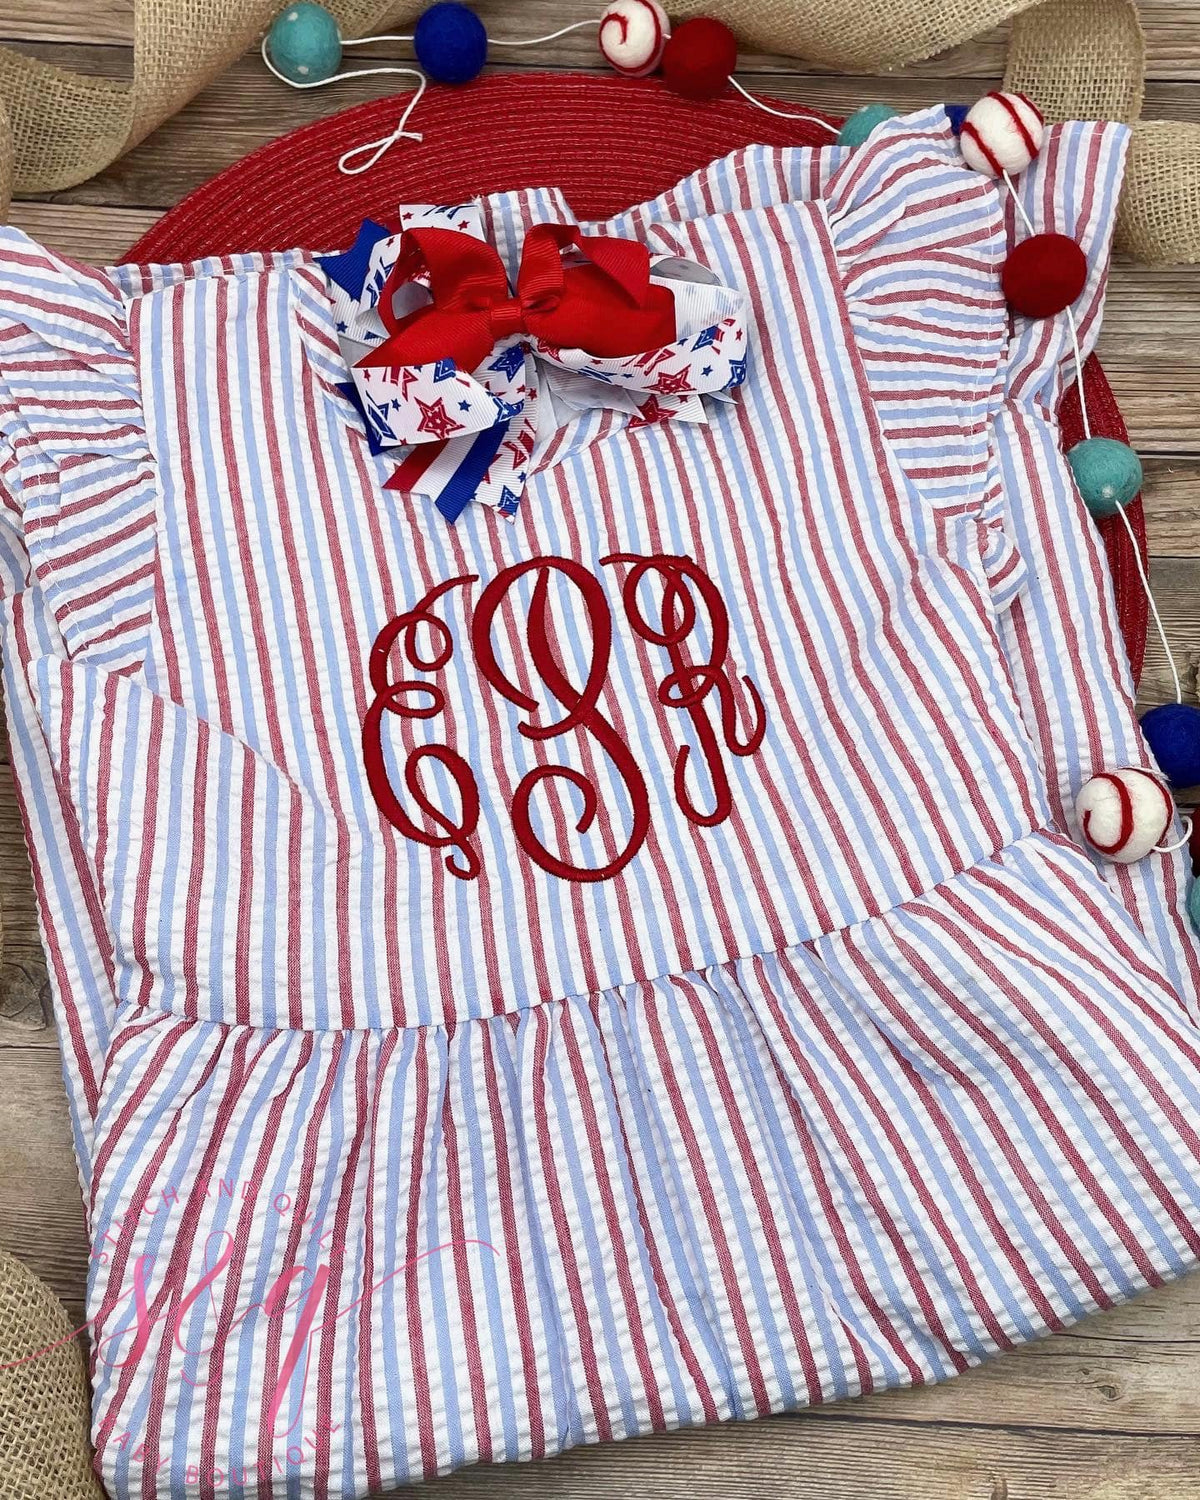 Adorable 4th of July Outfit - Personalized Seersucker Dress in Red, White, and Blue, Patriotic Dress for girls